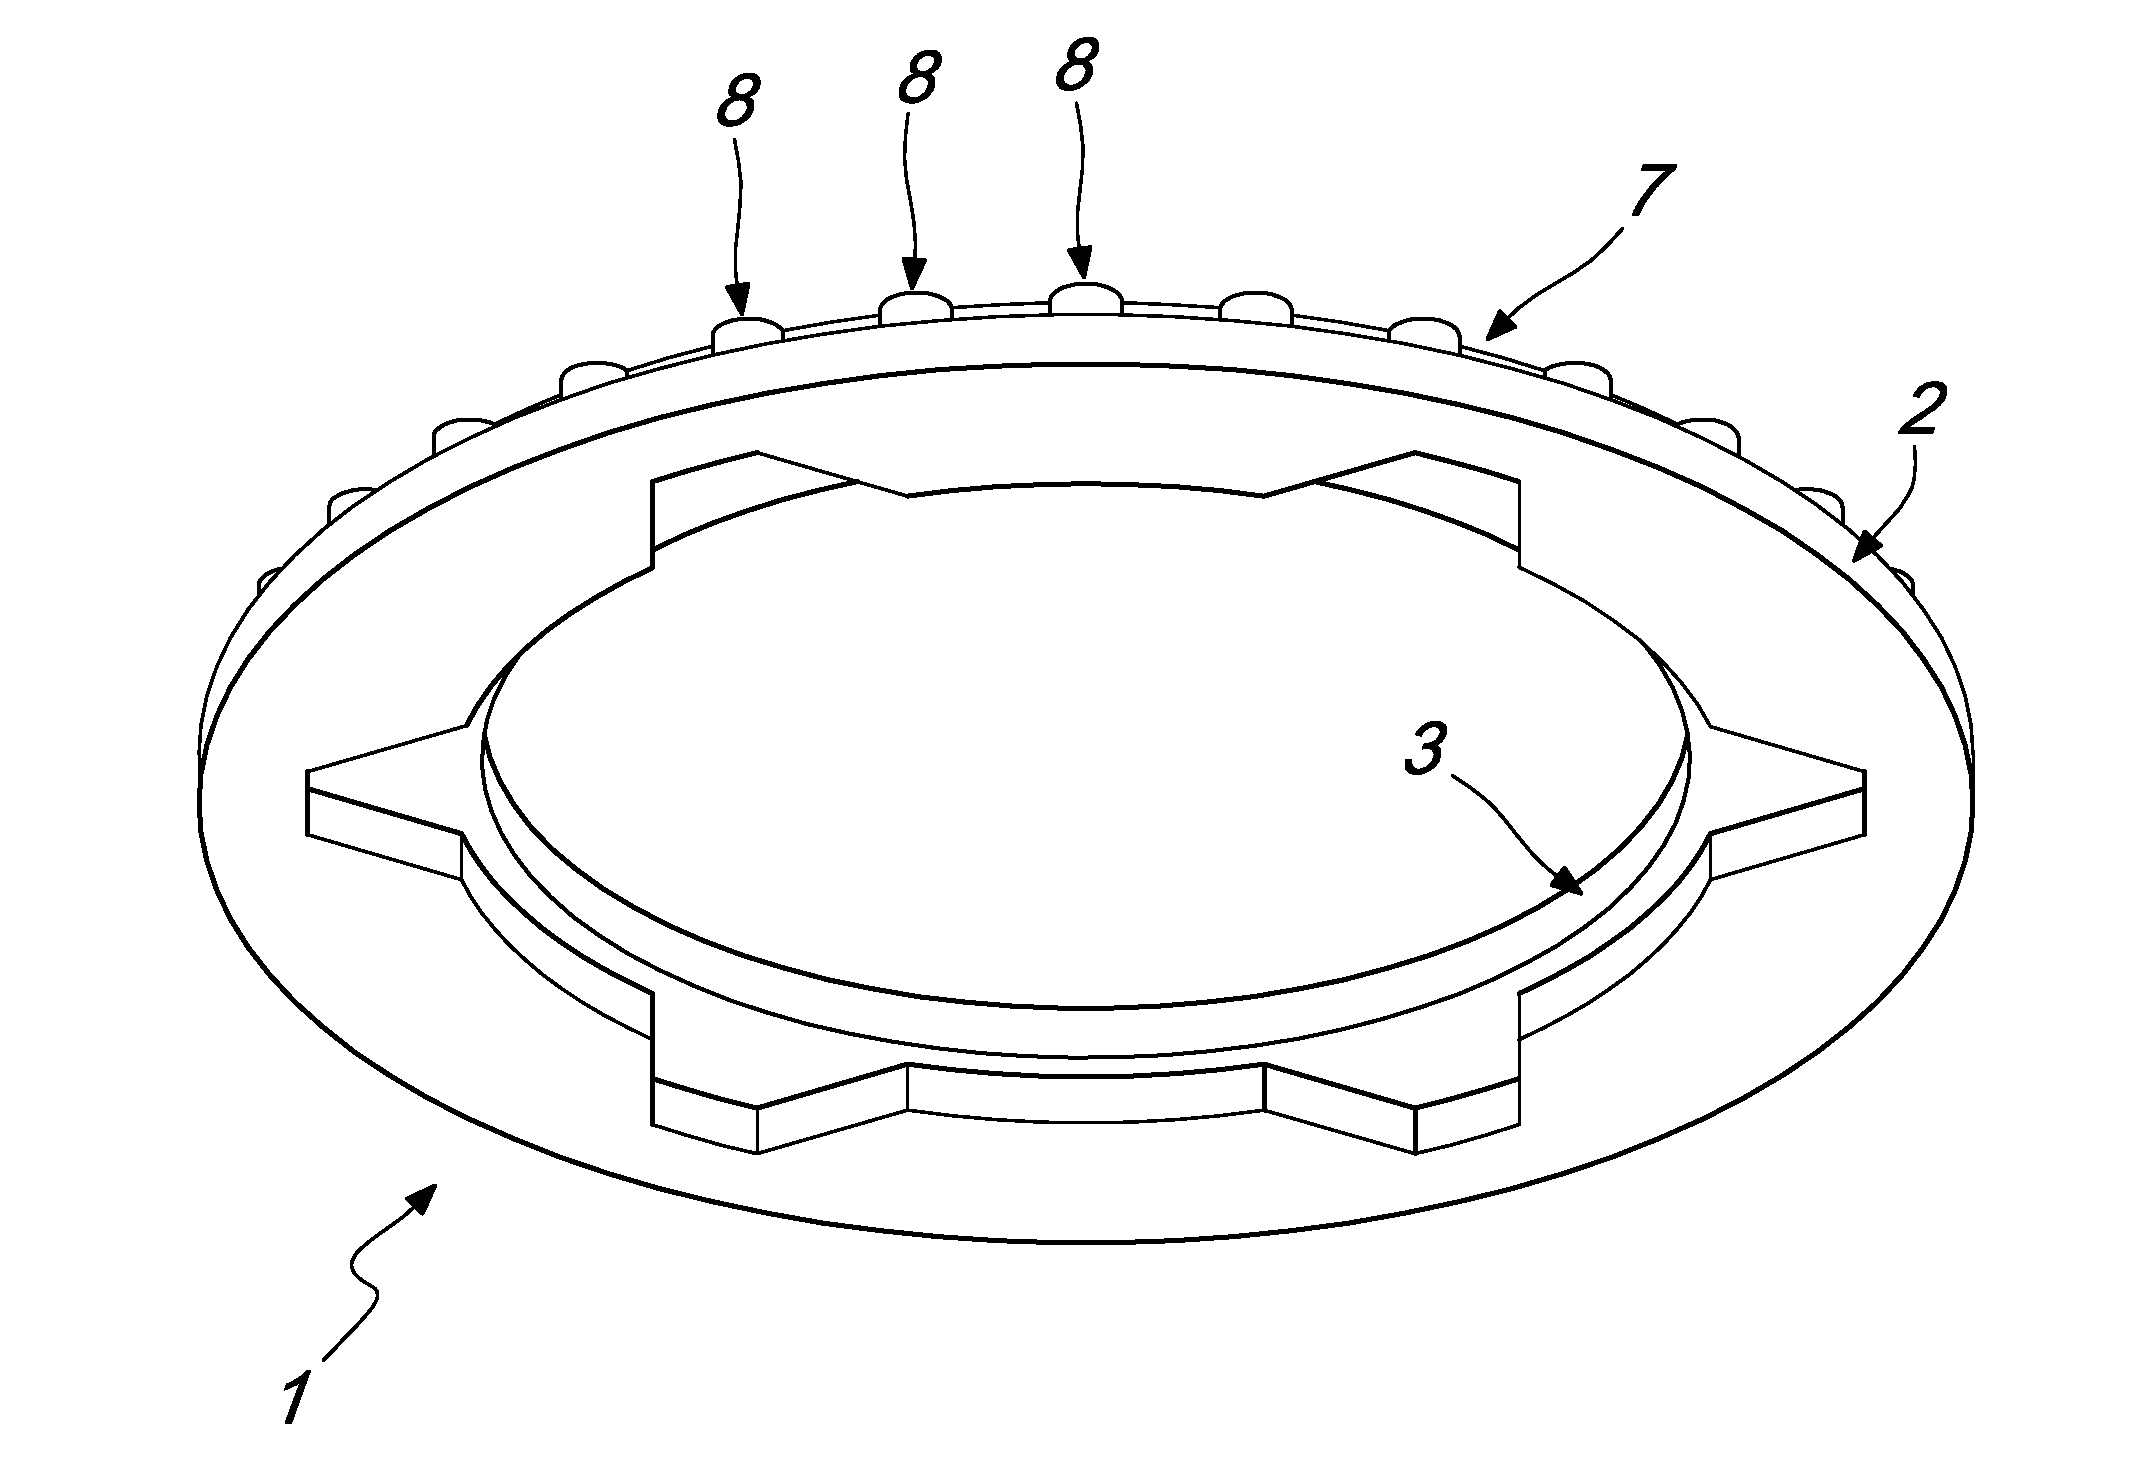 Connecting flange for transmission elements of cycles and motorcycles